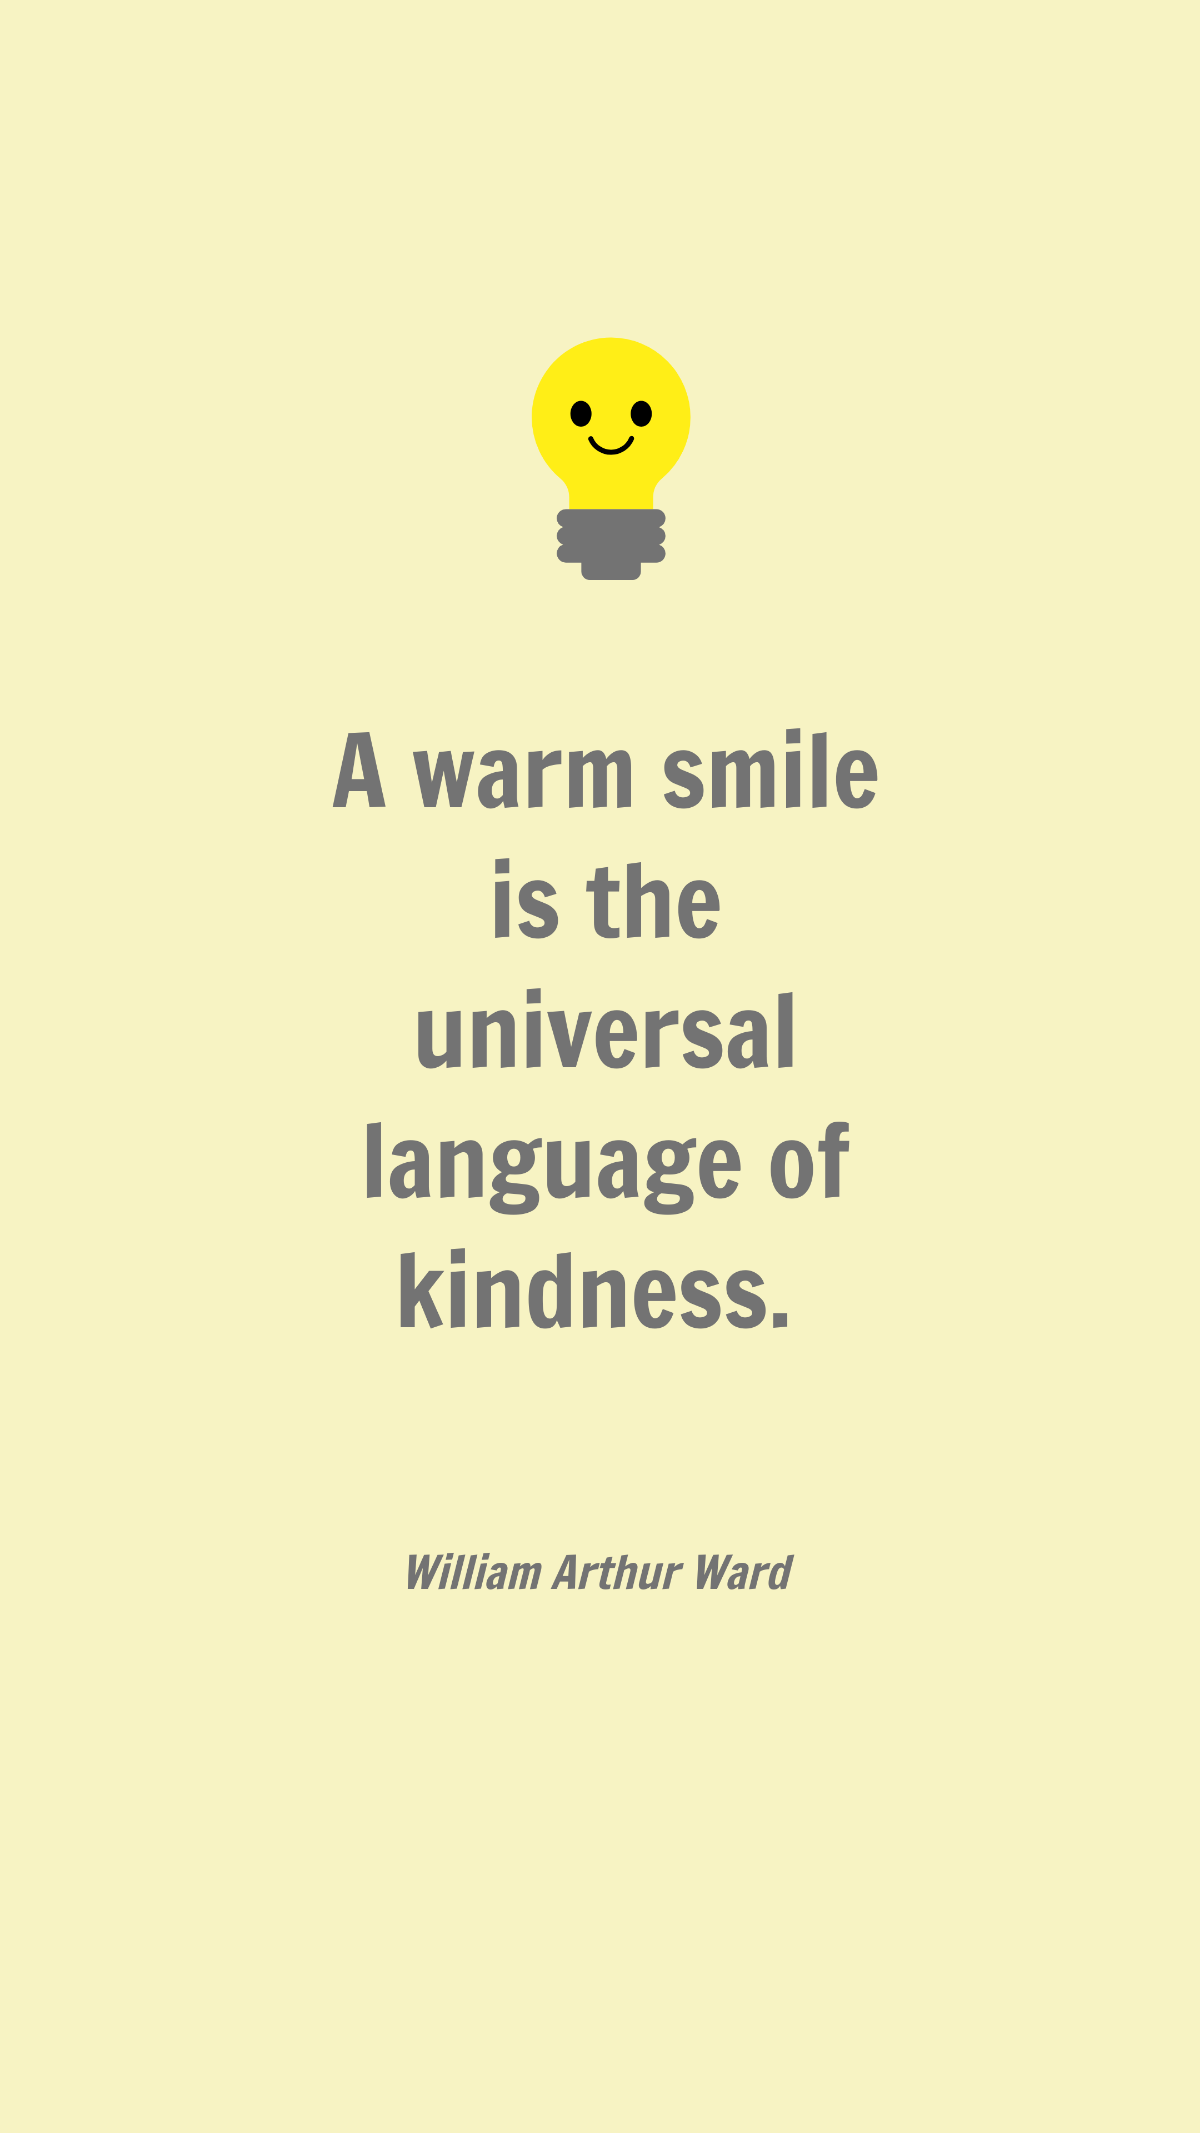 William Arthur Ward - A warm smile is the universal language of kindness.